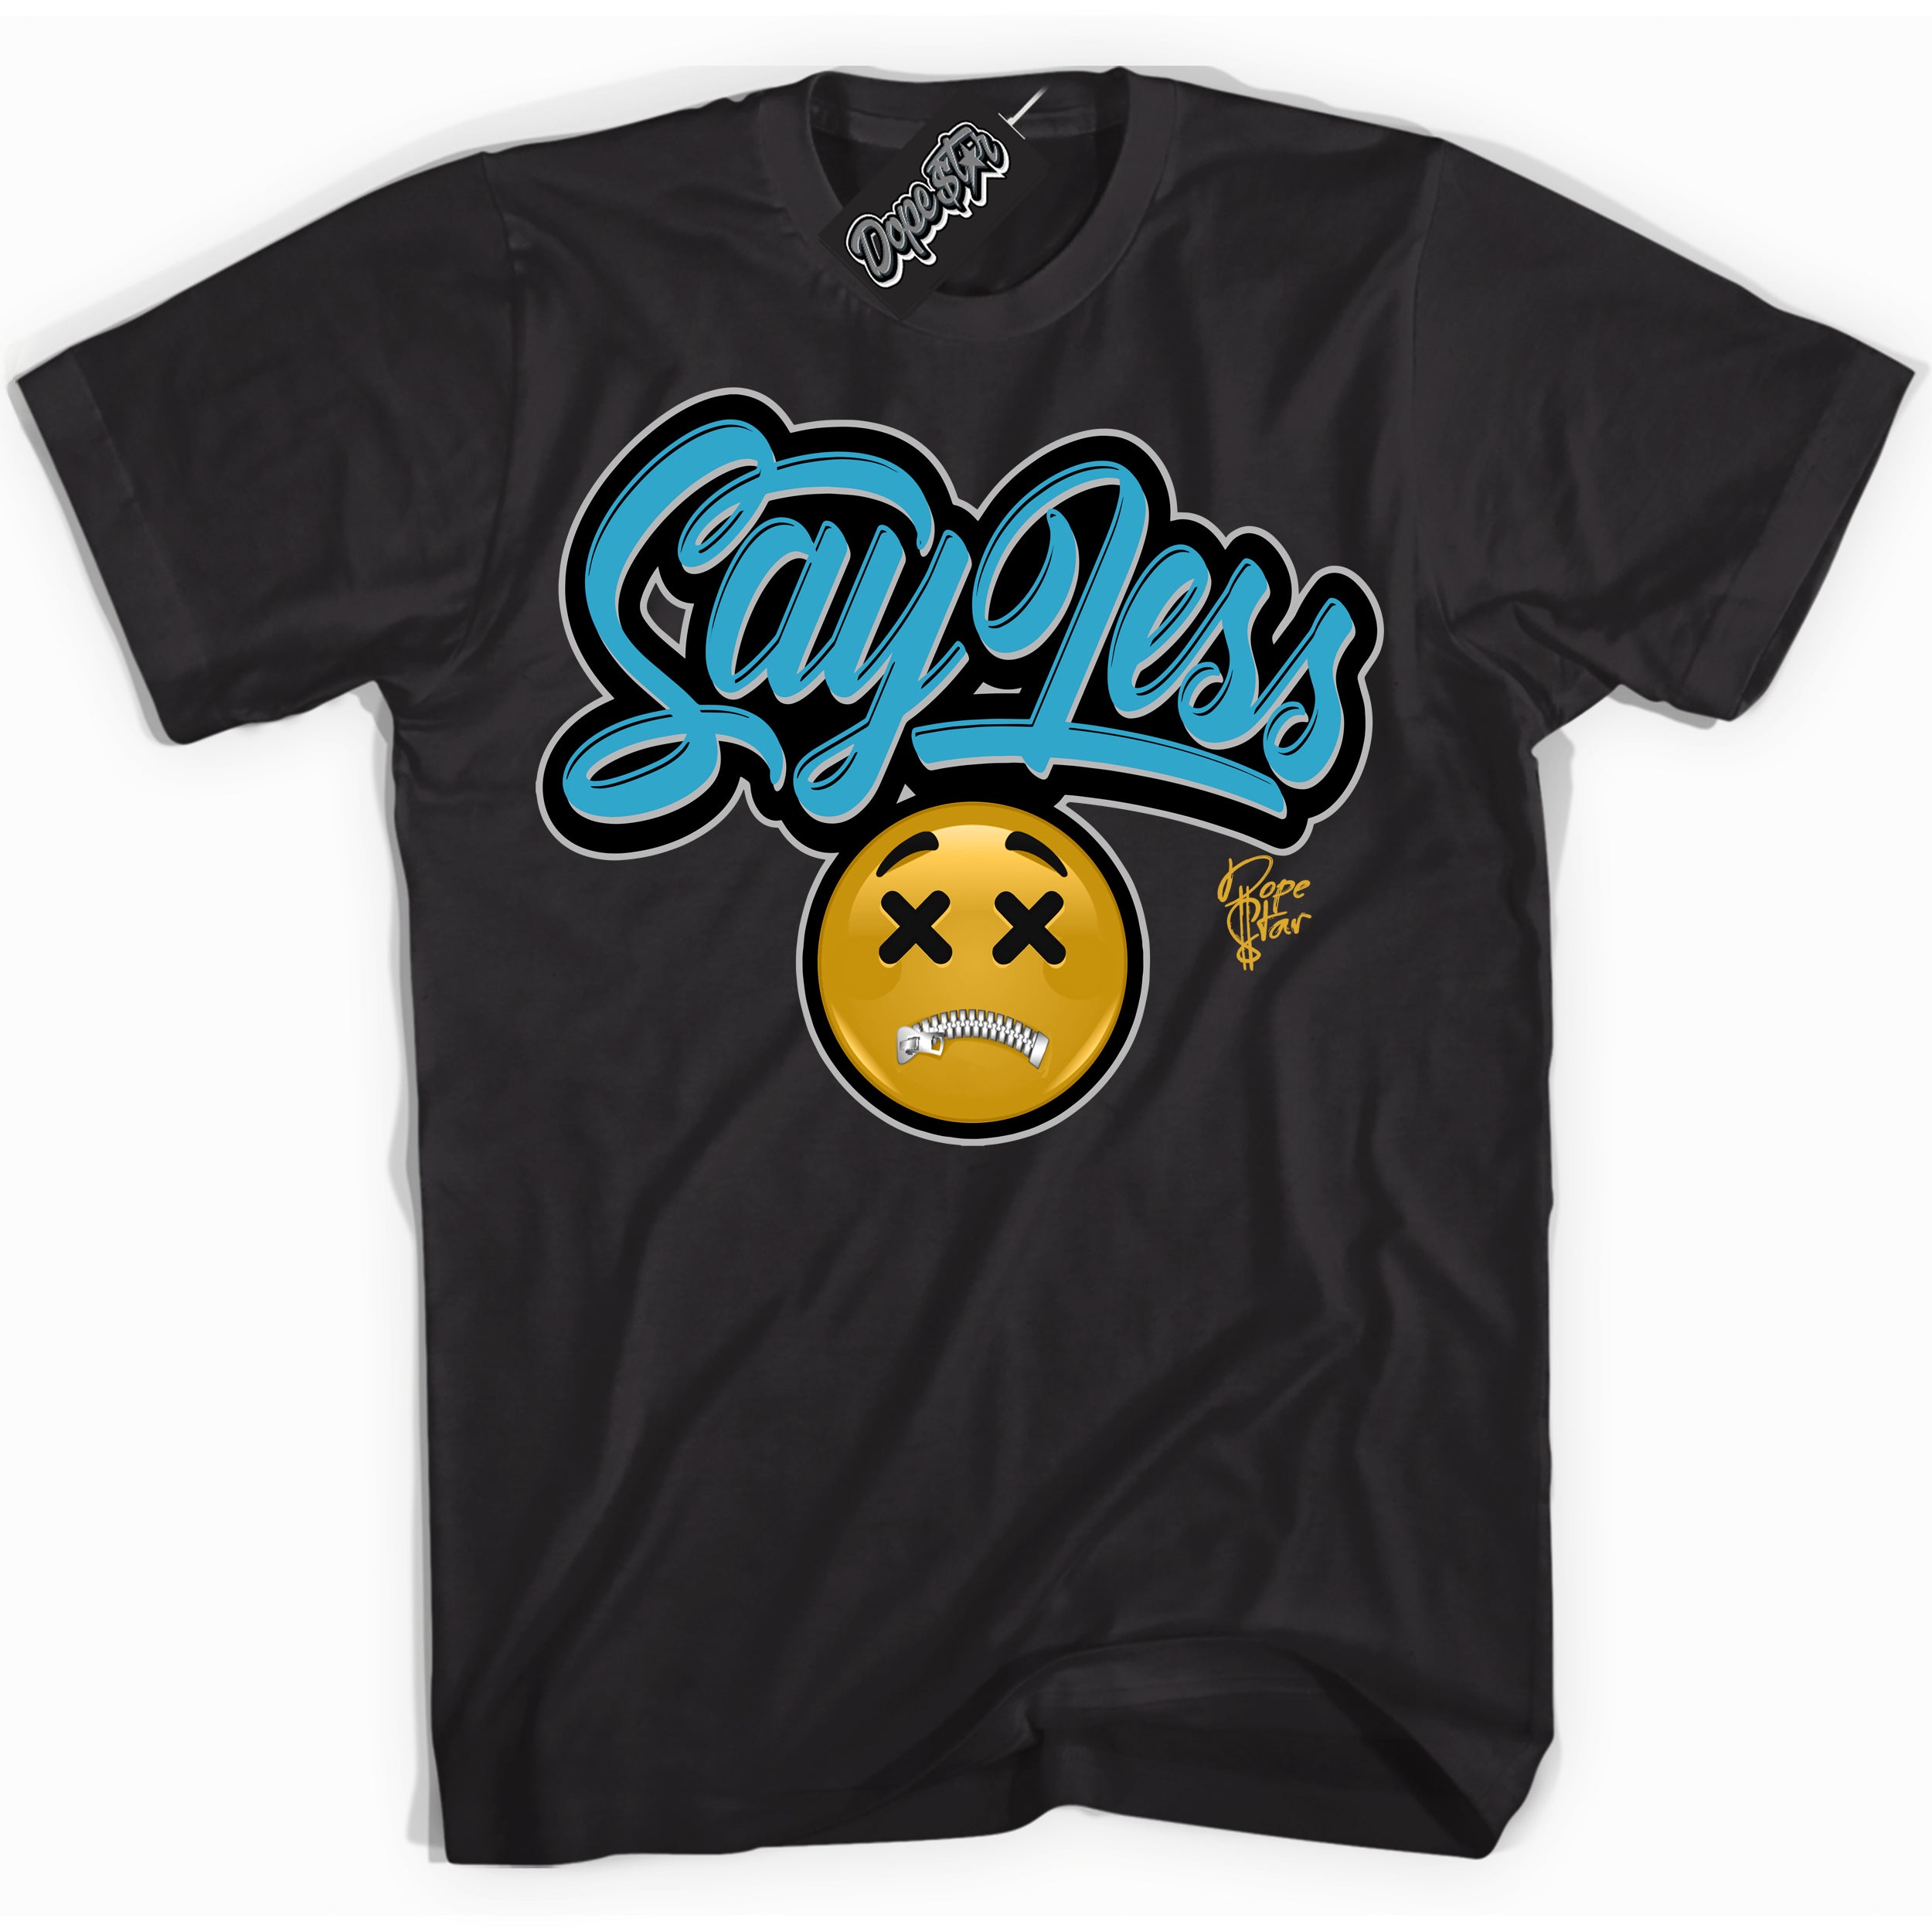 Cool Black Shirt with “ Say Less” design that perfectly matches Aqua 5s Sneakers.